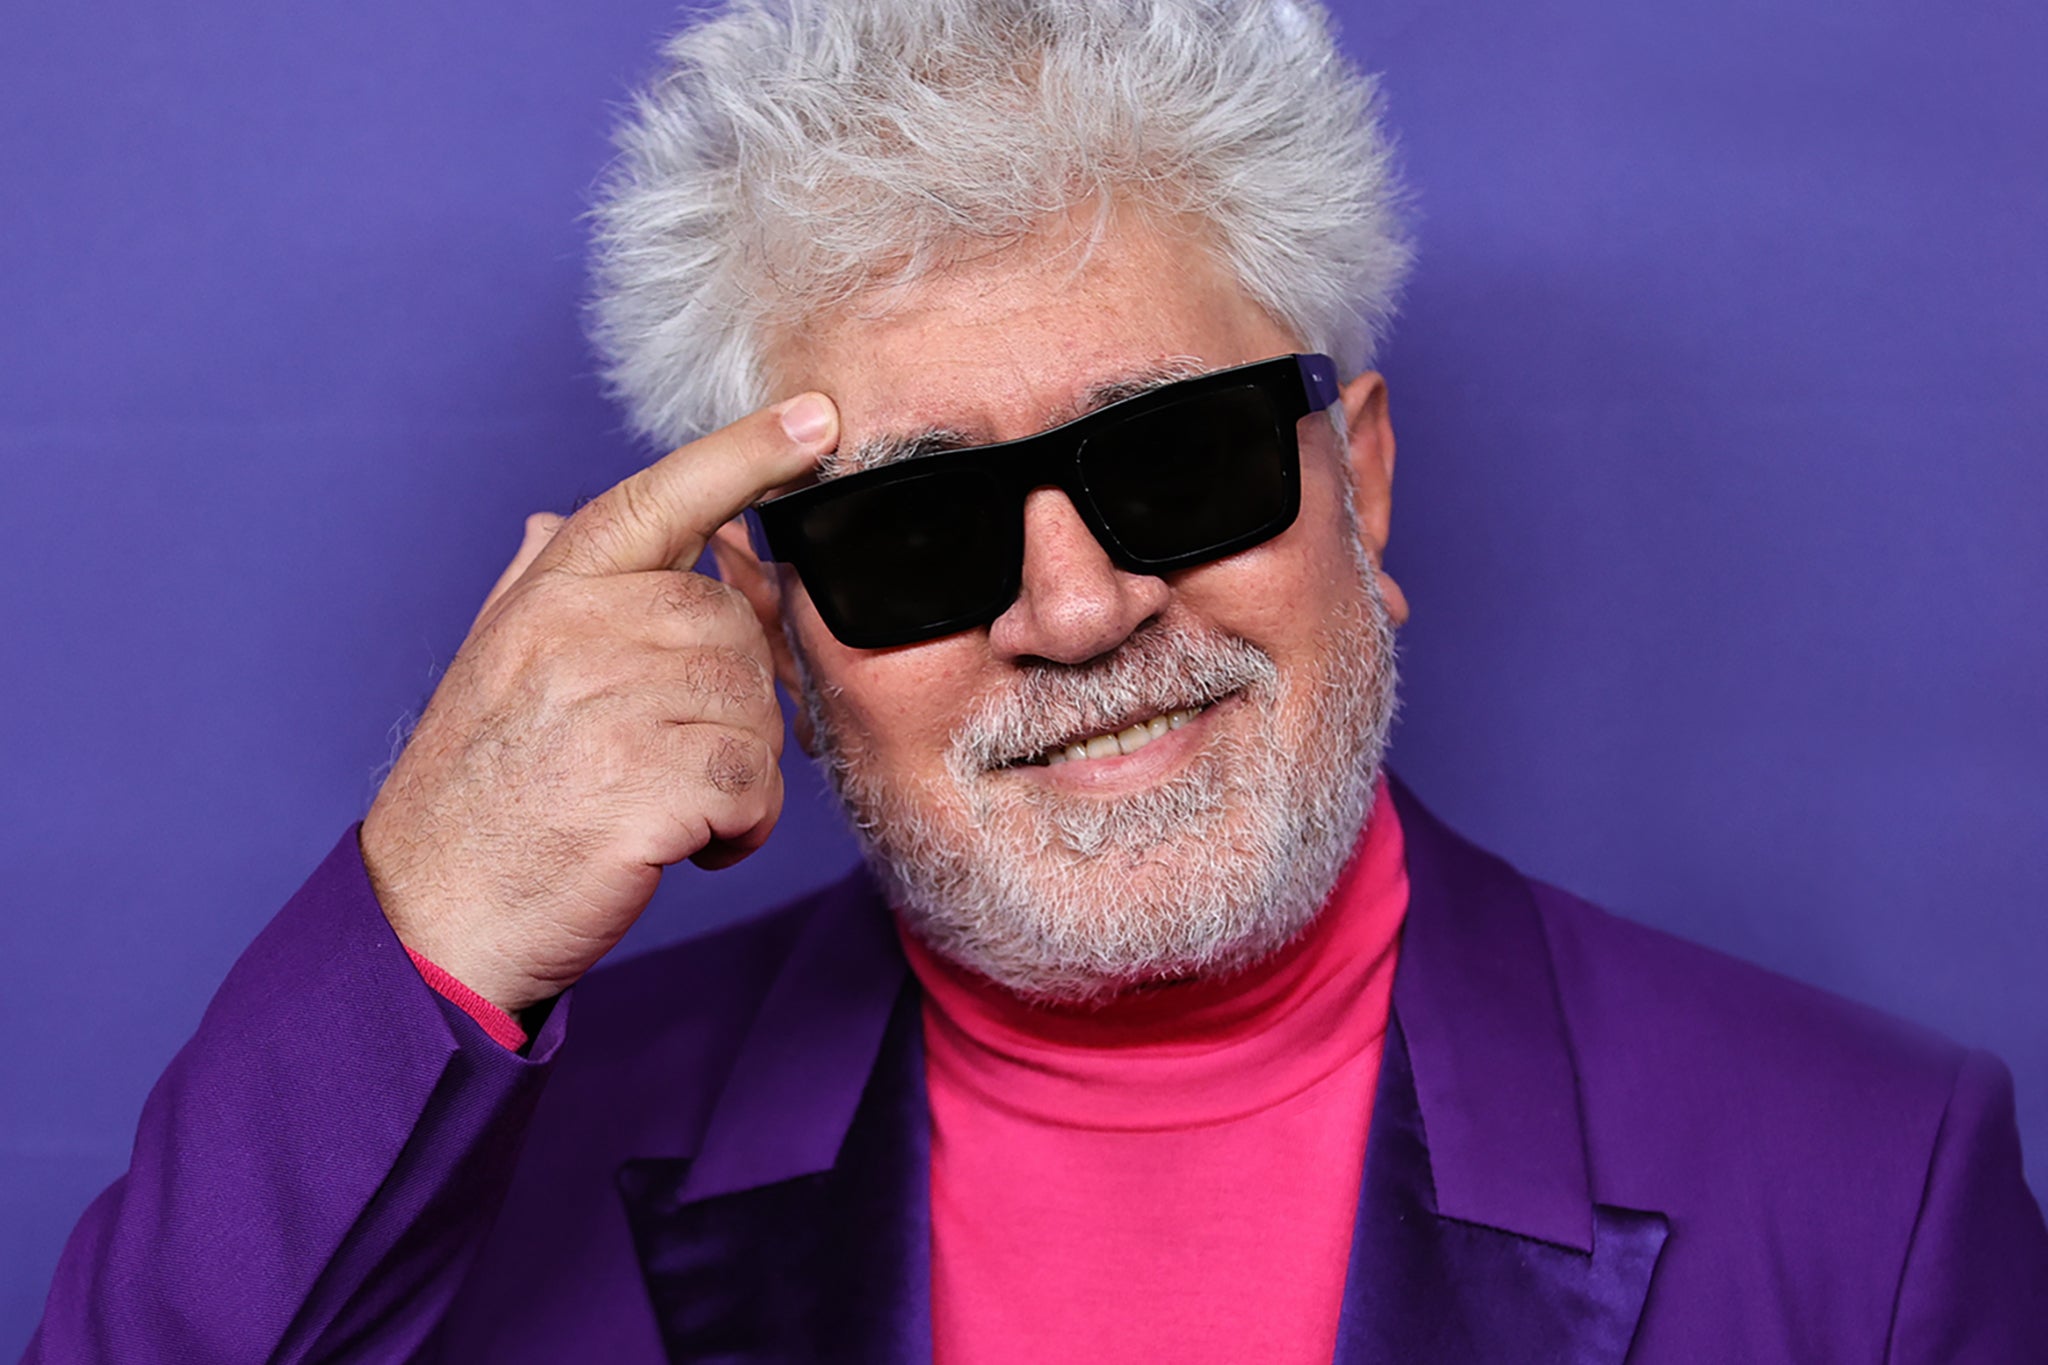 Pedro Almodovar wanted to do a different kind of sexy image photo